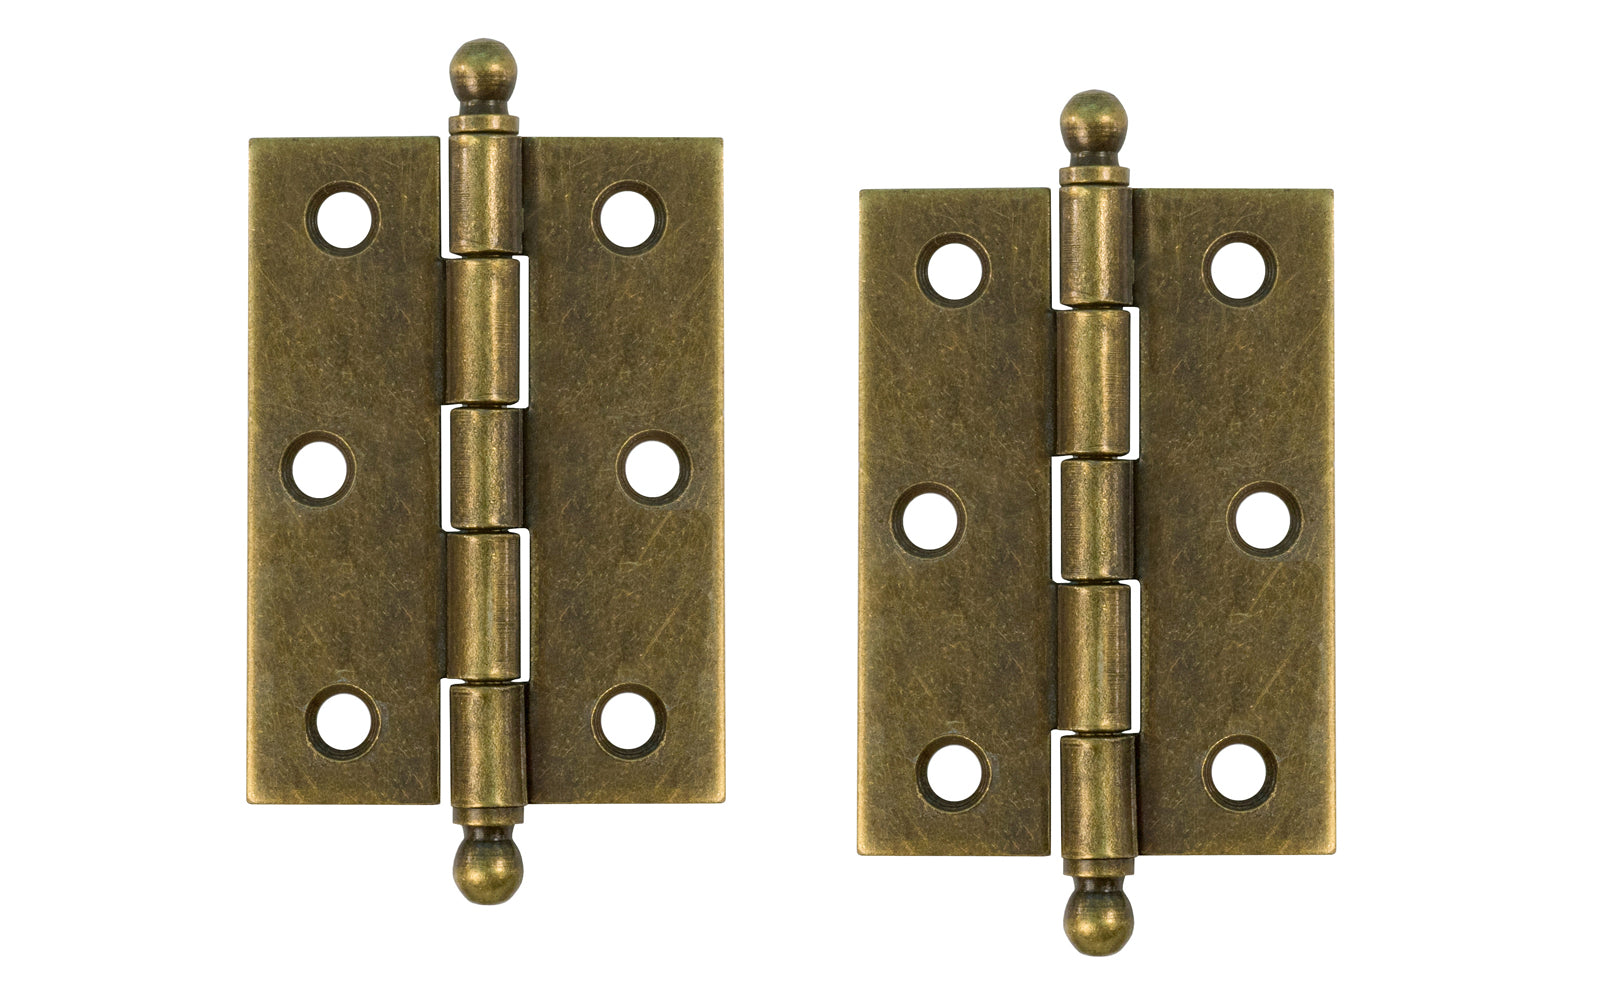 Traditional & classic ball-tip steel cabinet hinges with loose pins. Removable hinge pins which makes for easy installation when working with cabinets. 2-7/16